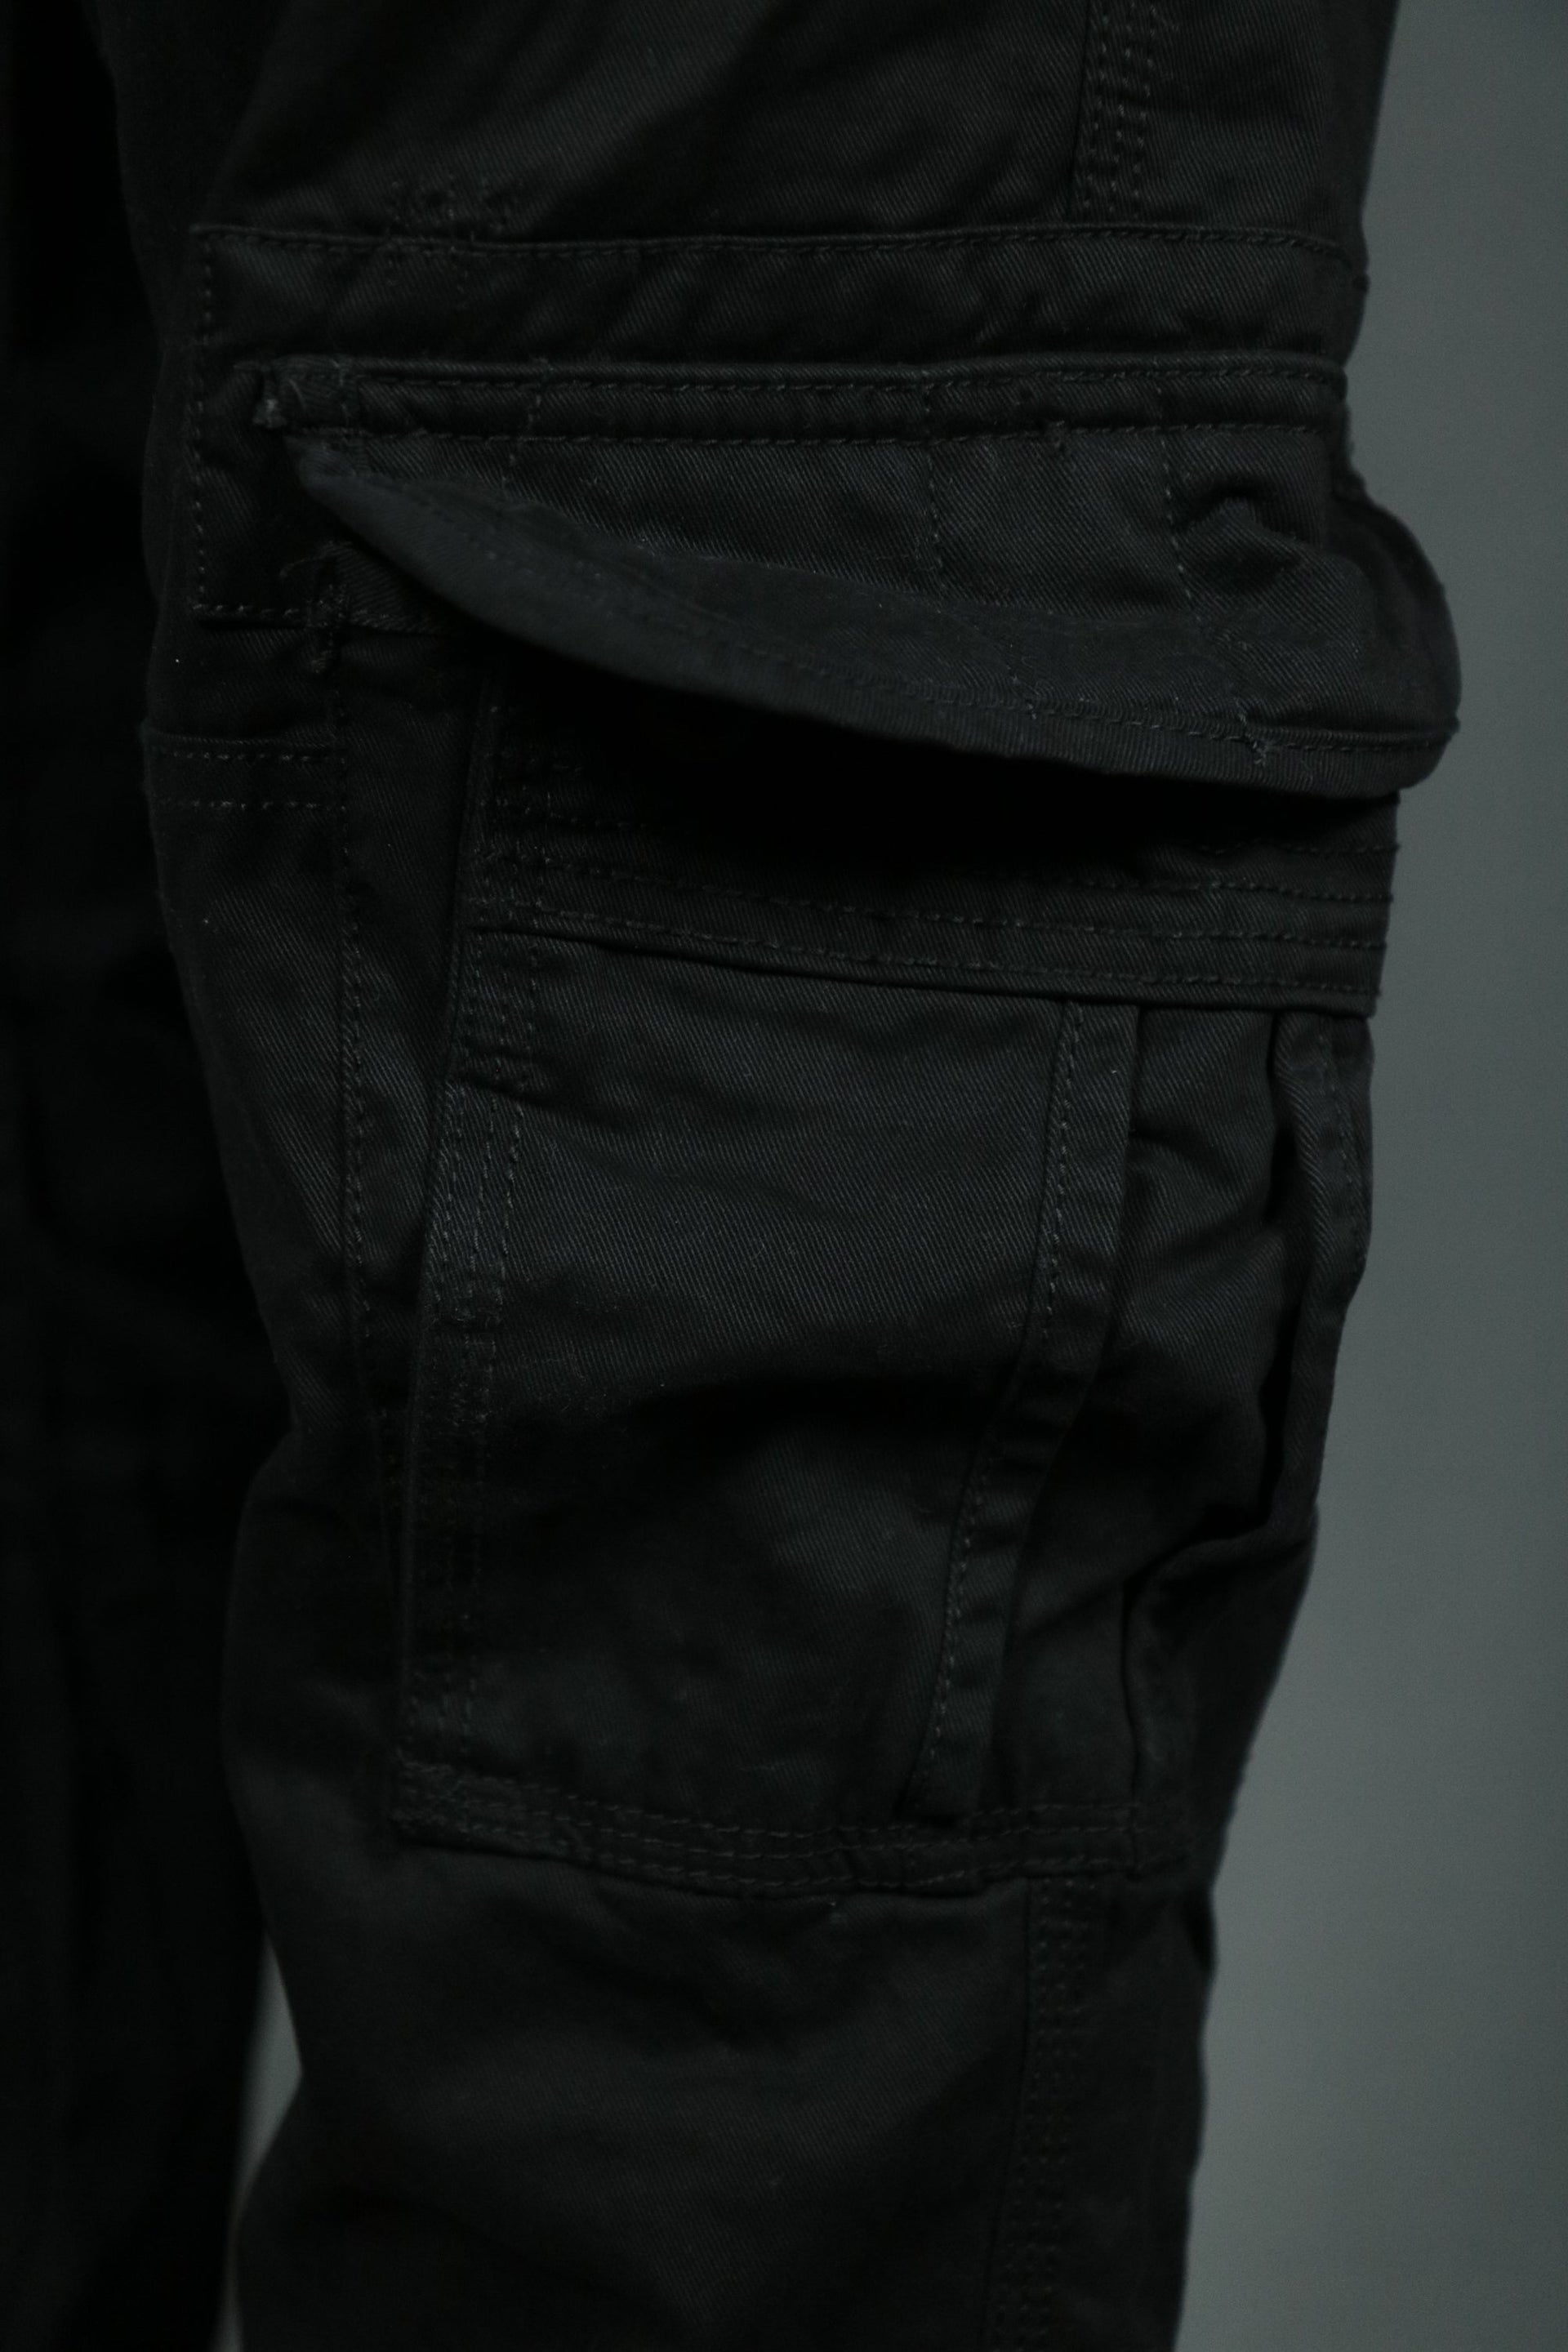 One of the six pockets of the black cargo pants for men.